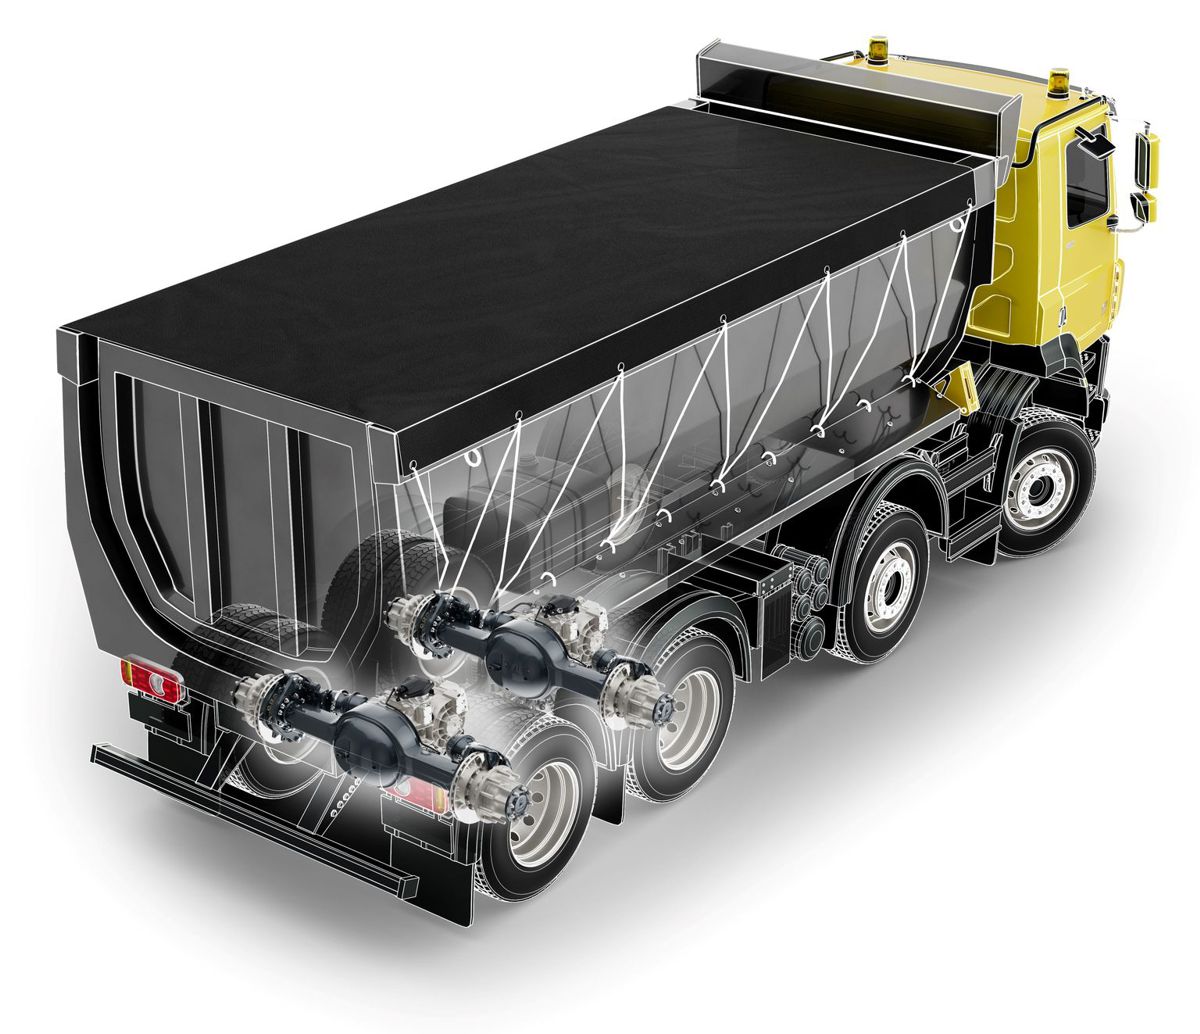 The Allison eGen Power® is a drop-in solution compatible with many existing truck chassis, helping OEMs to accelerate their vehicle development programs. It features fully integrated electric motors, a two-speed gearbox, an integrated oil cooler and a pump for optimal efficiency and performance and is compatible with battery electric vehicles (BEV) and fuel cell electric vehicles (FCEV) as well as hybrid applications.